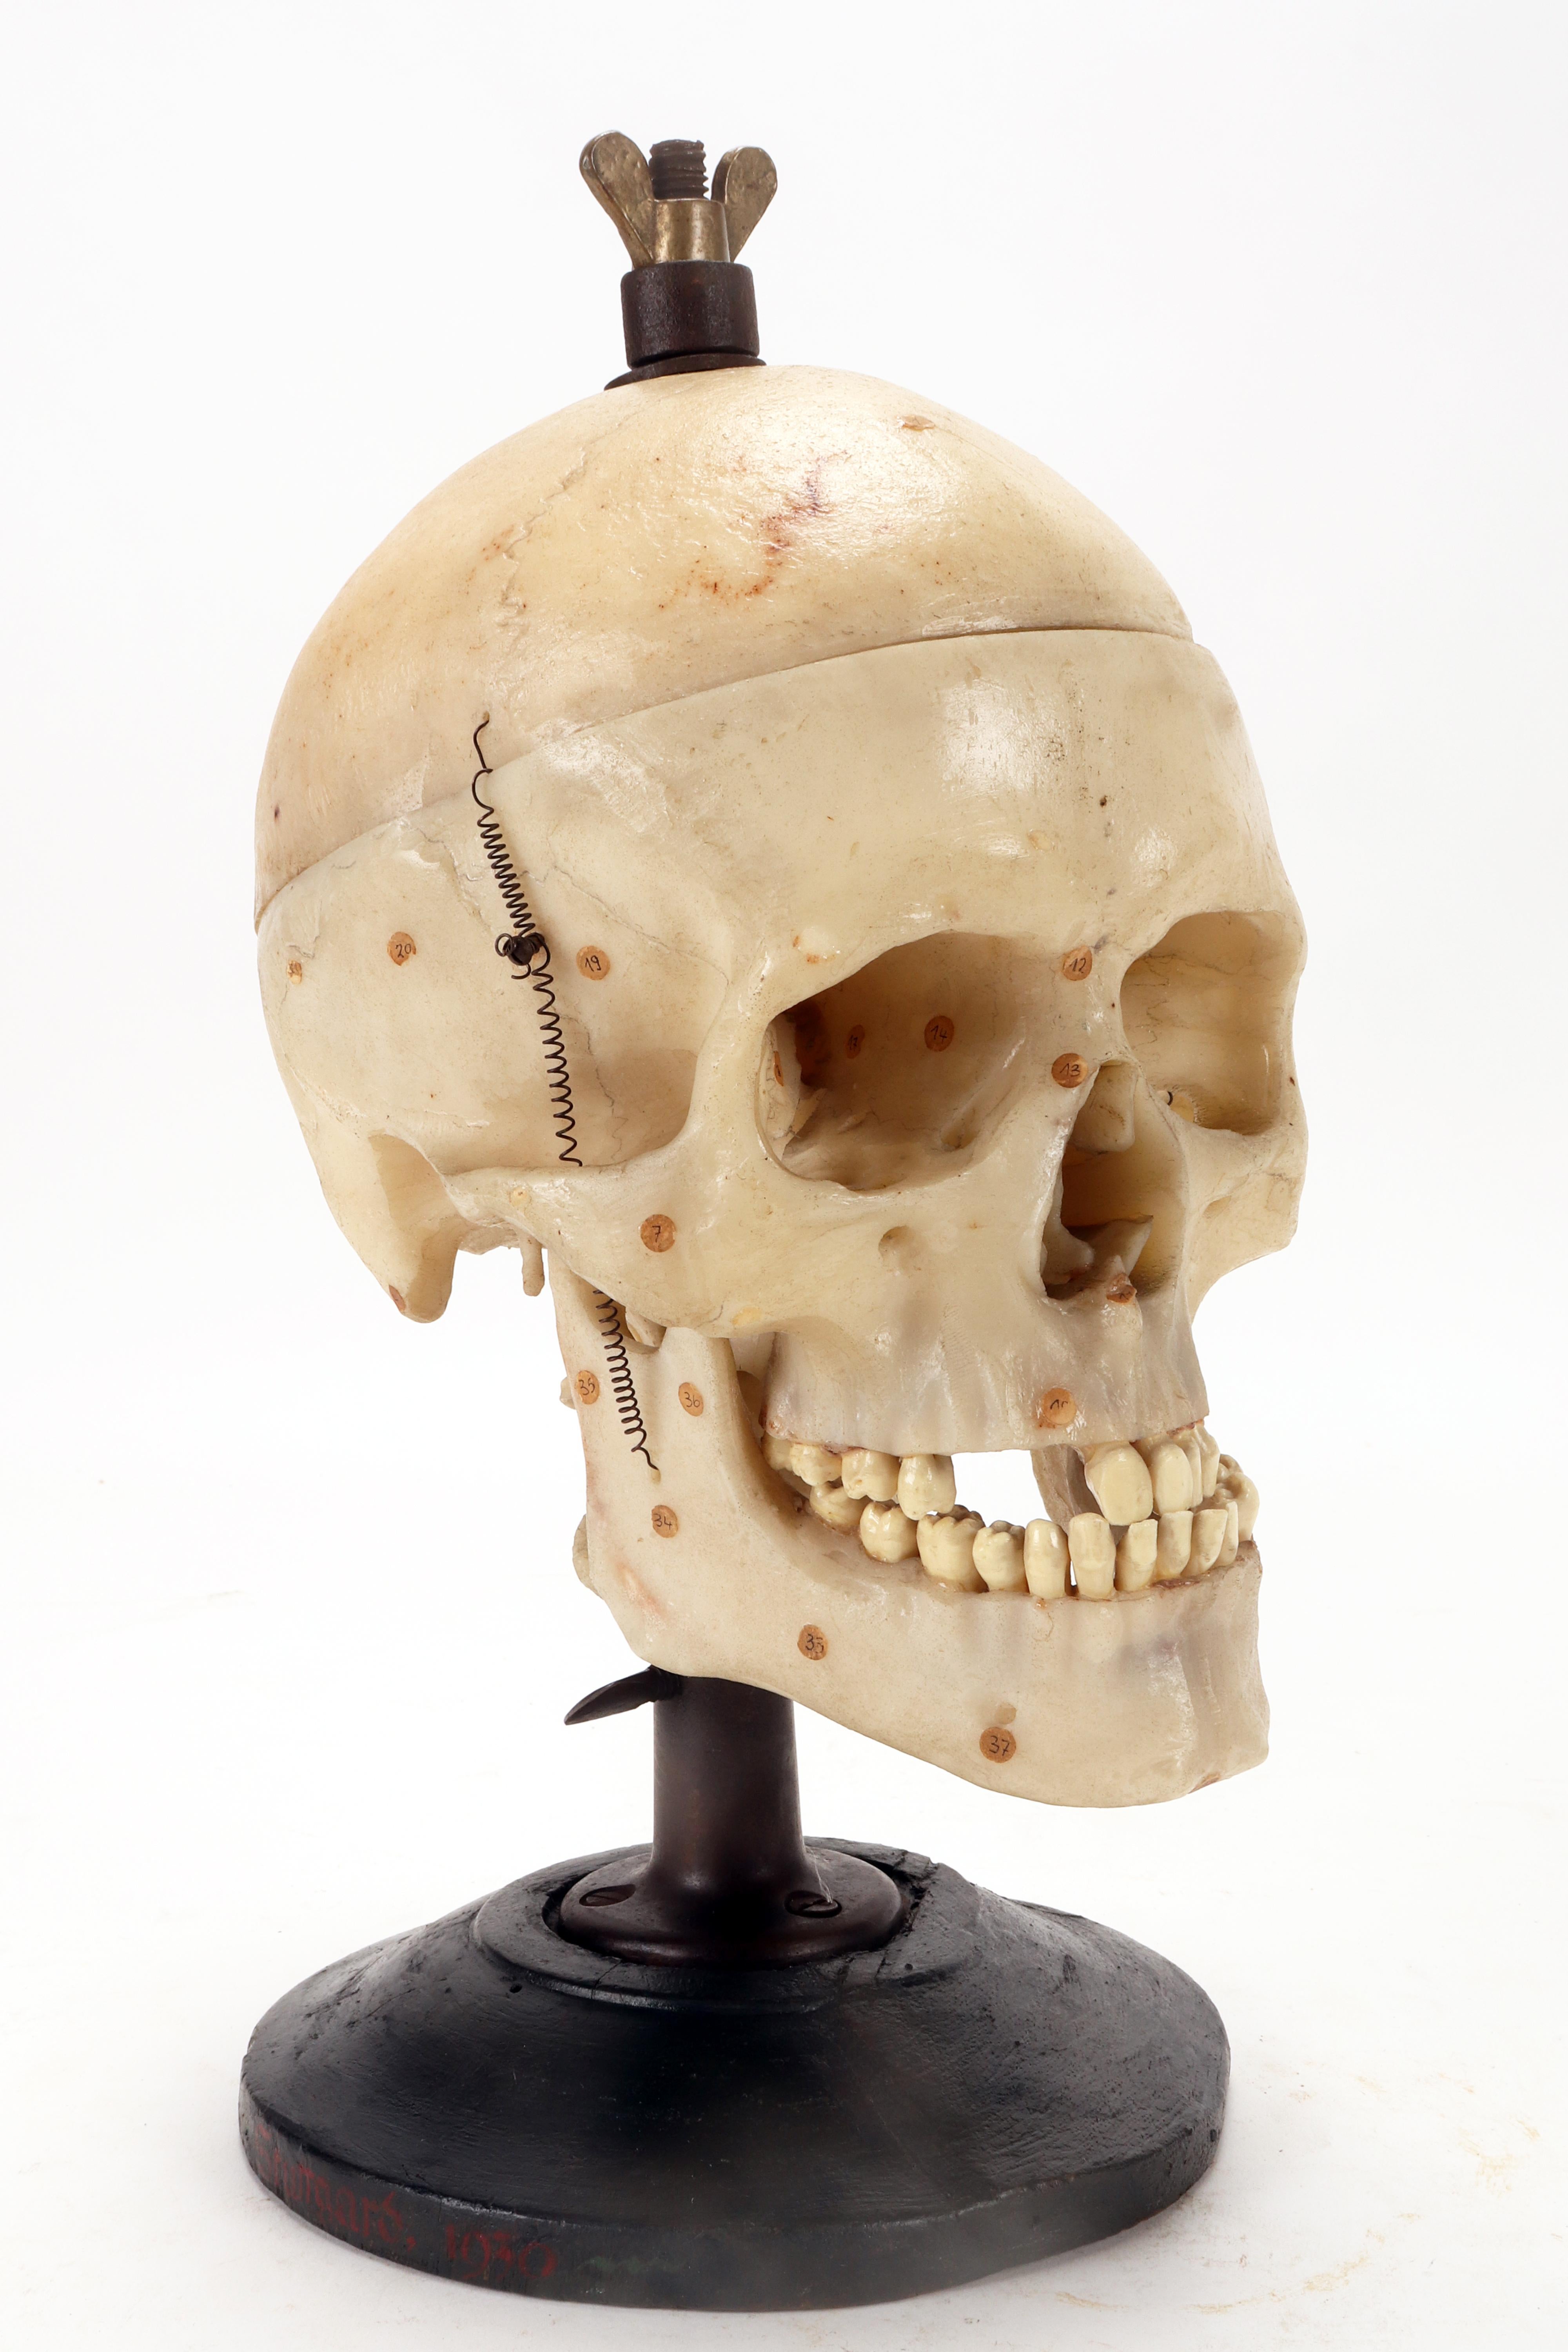 20th Century Anatomical model: a human skull model life size, Stuttgard, Germany 1930. For Sale